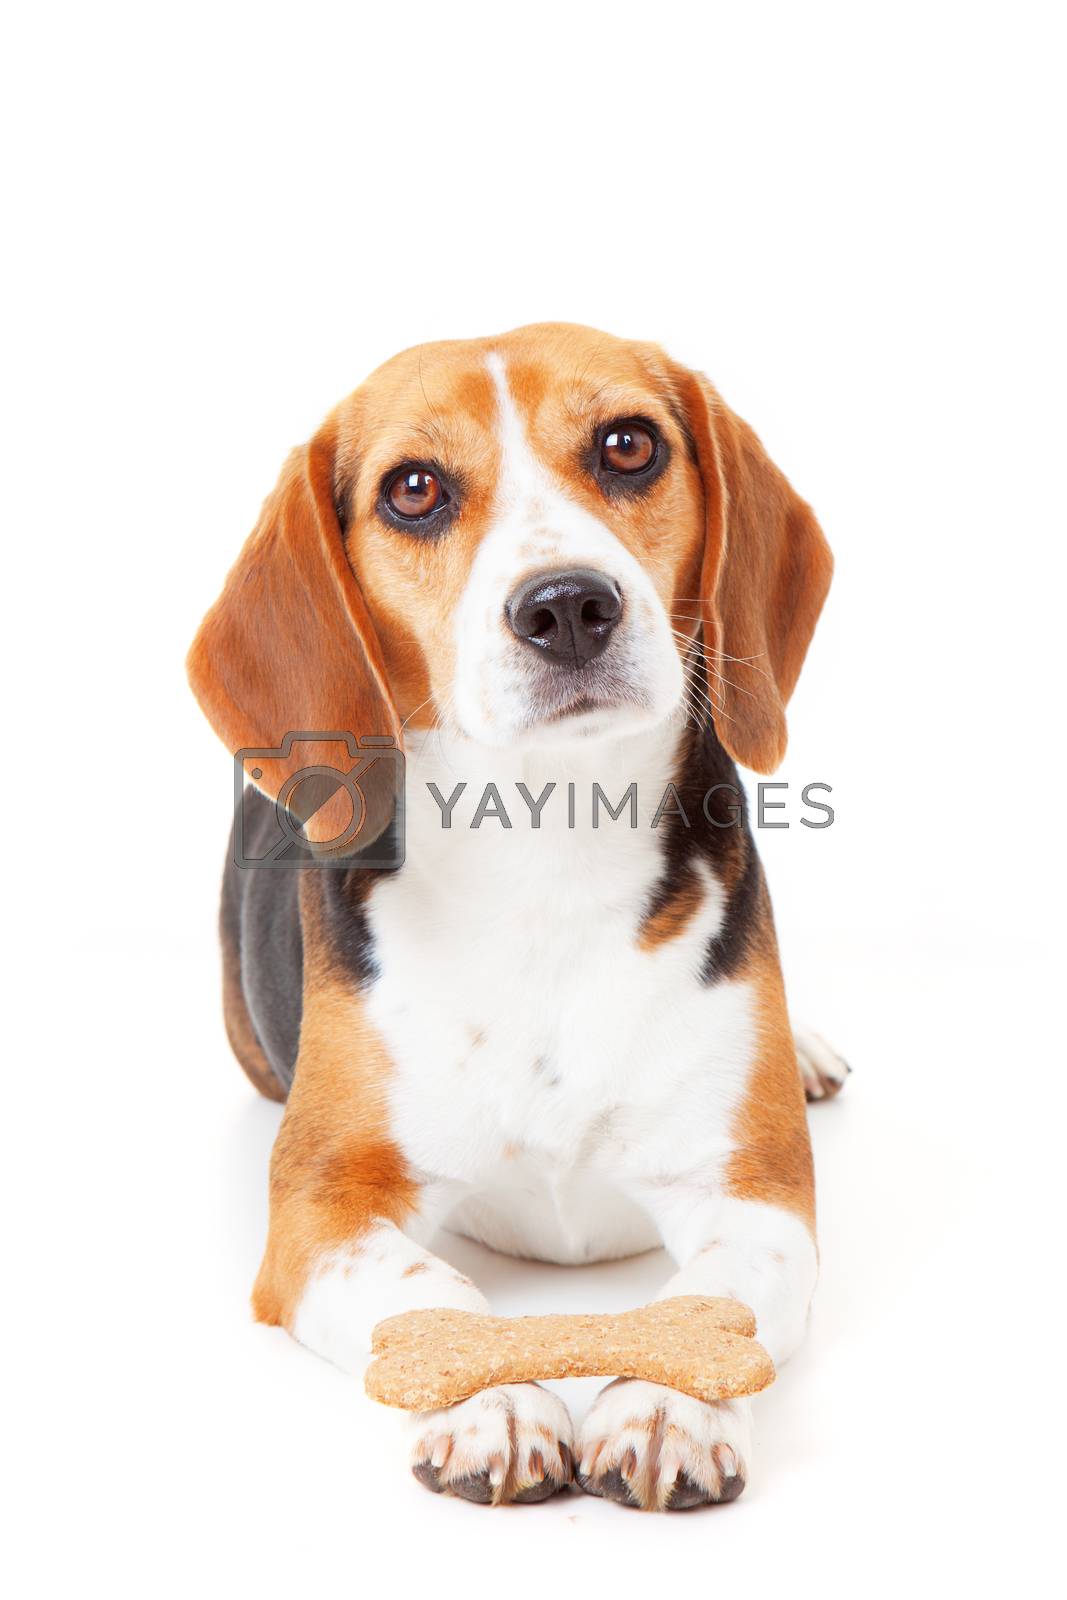 Royalty free image of obedient dog training by mandy_godbehear